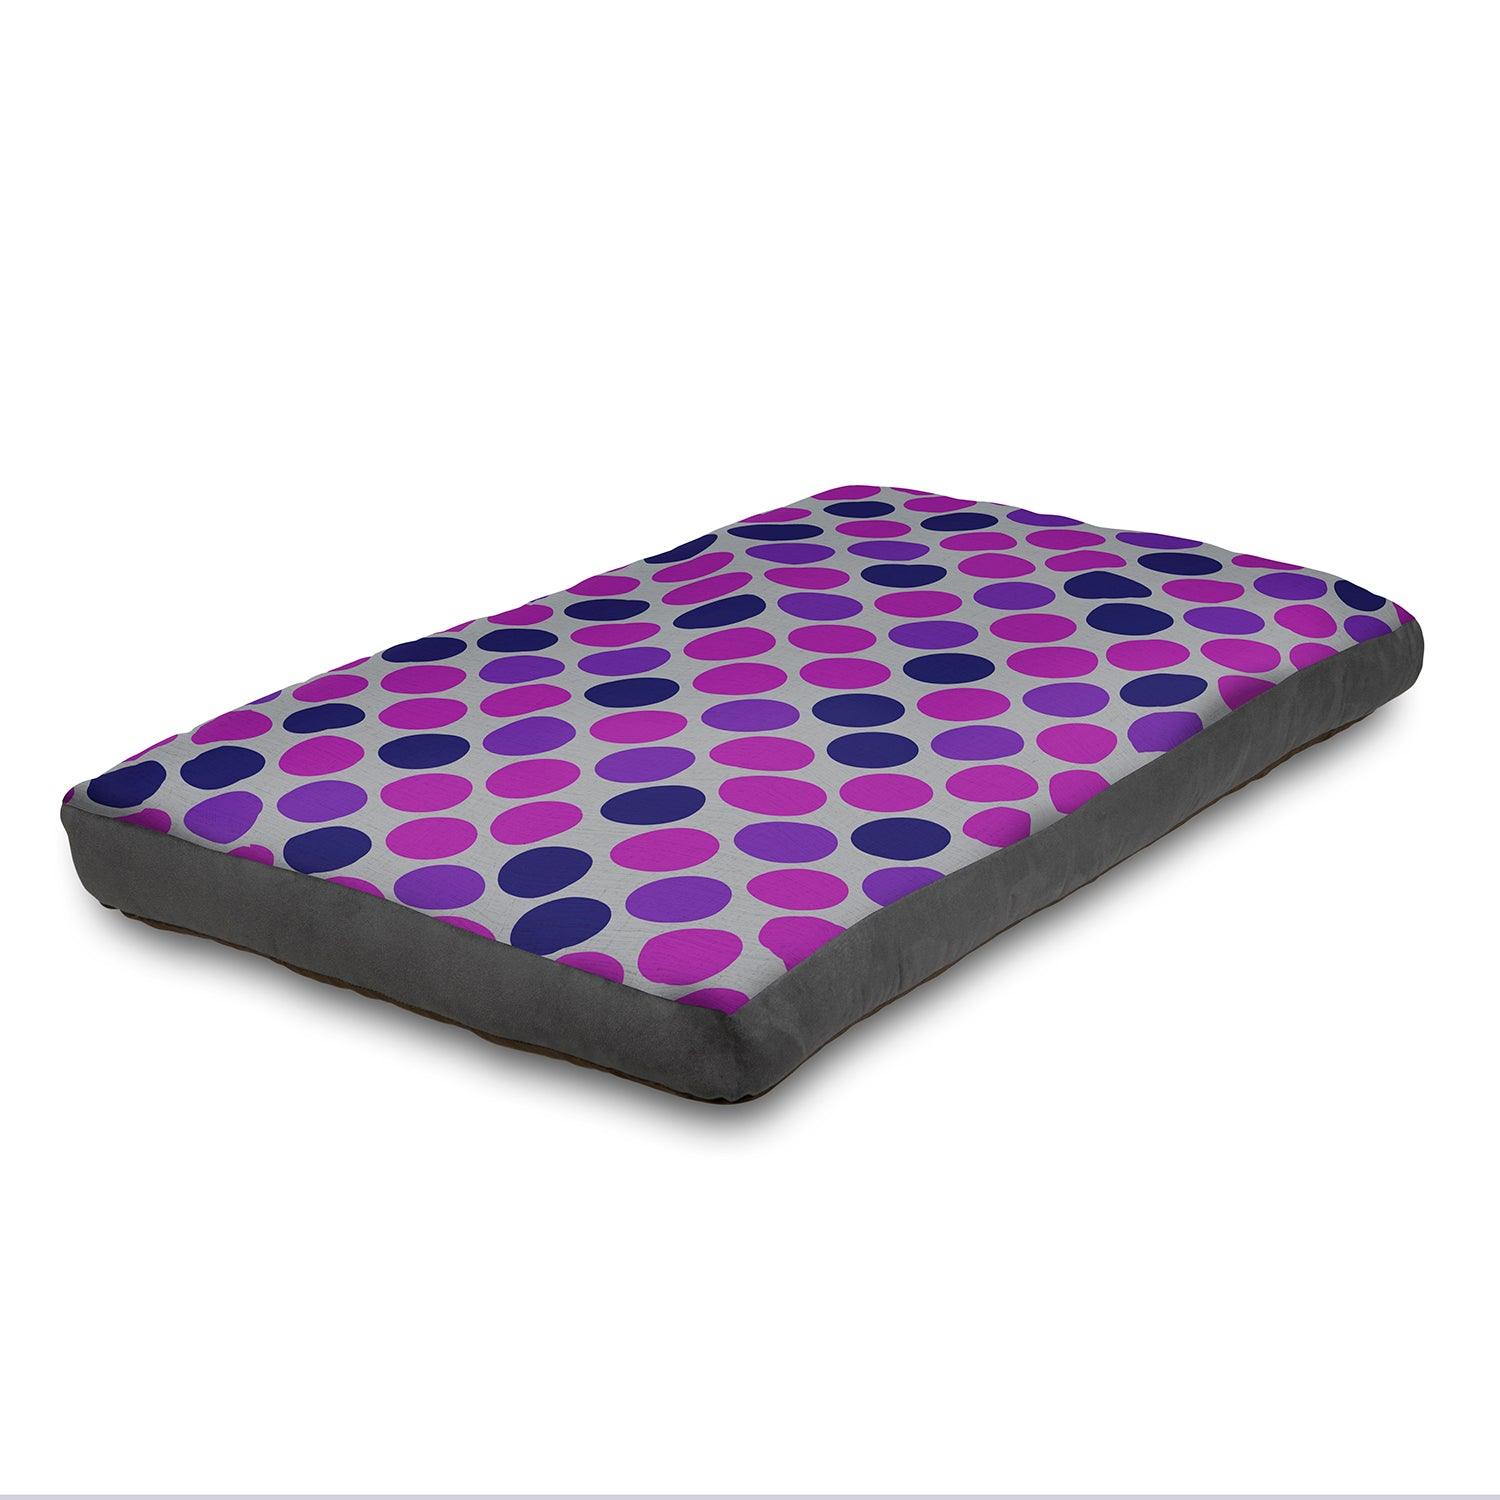 View Super Comfy Dog Bed Soft and Fluffy with Washable Cover Large 125 cm x 85 cm Circles information